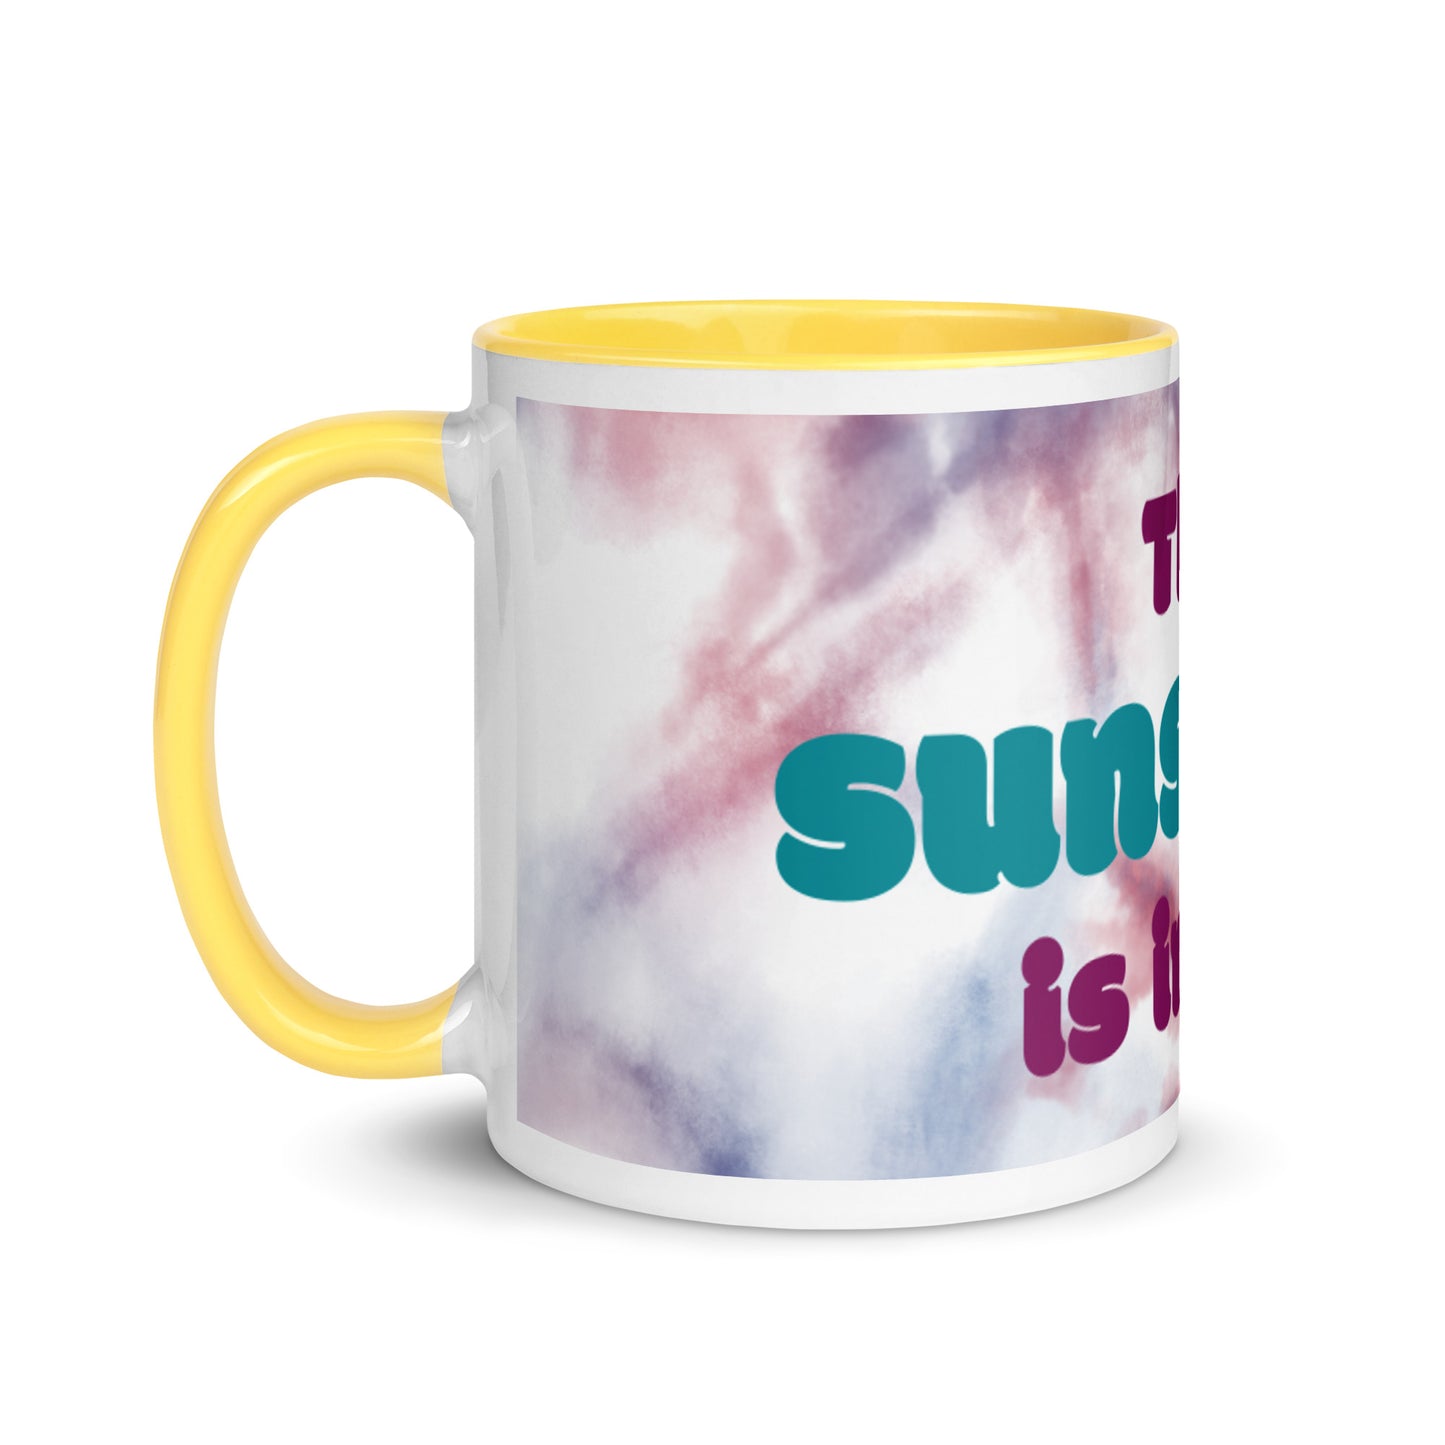 Tie Dye Color Mug - The sunshine is in me